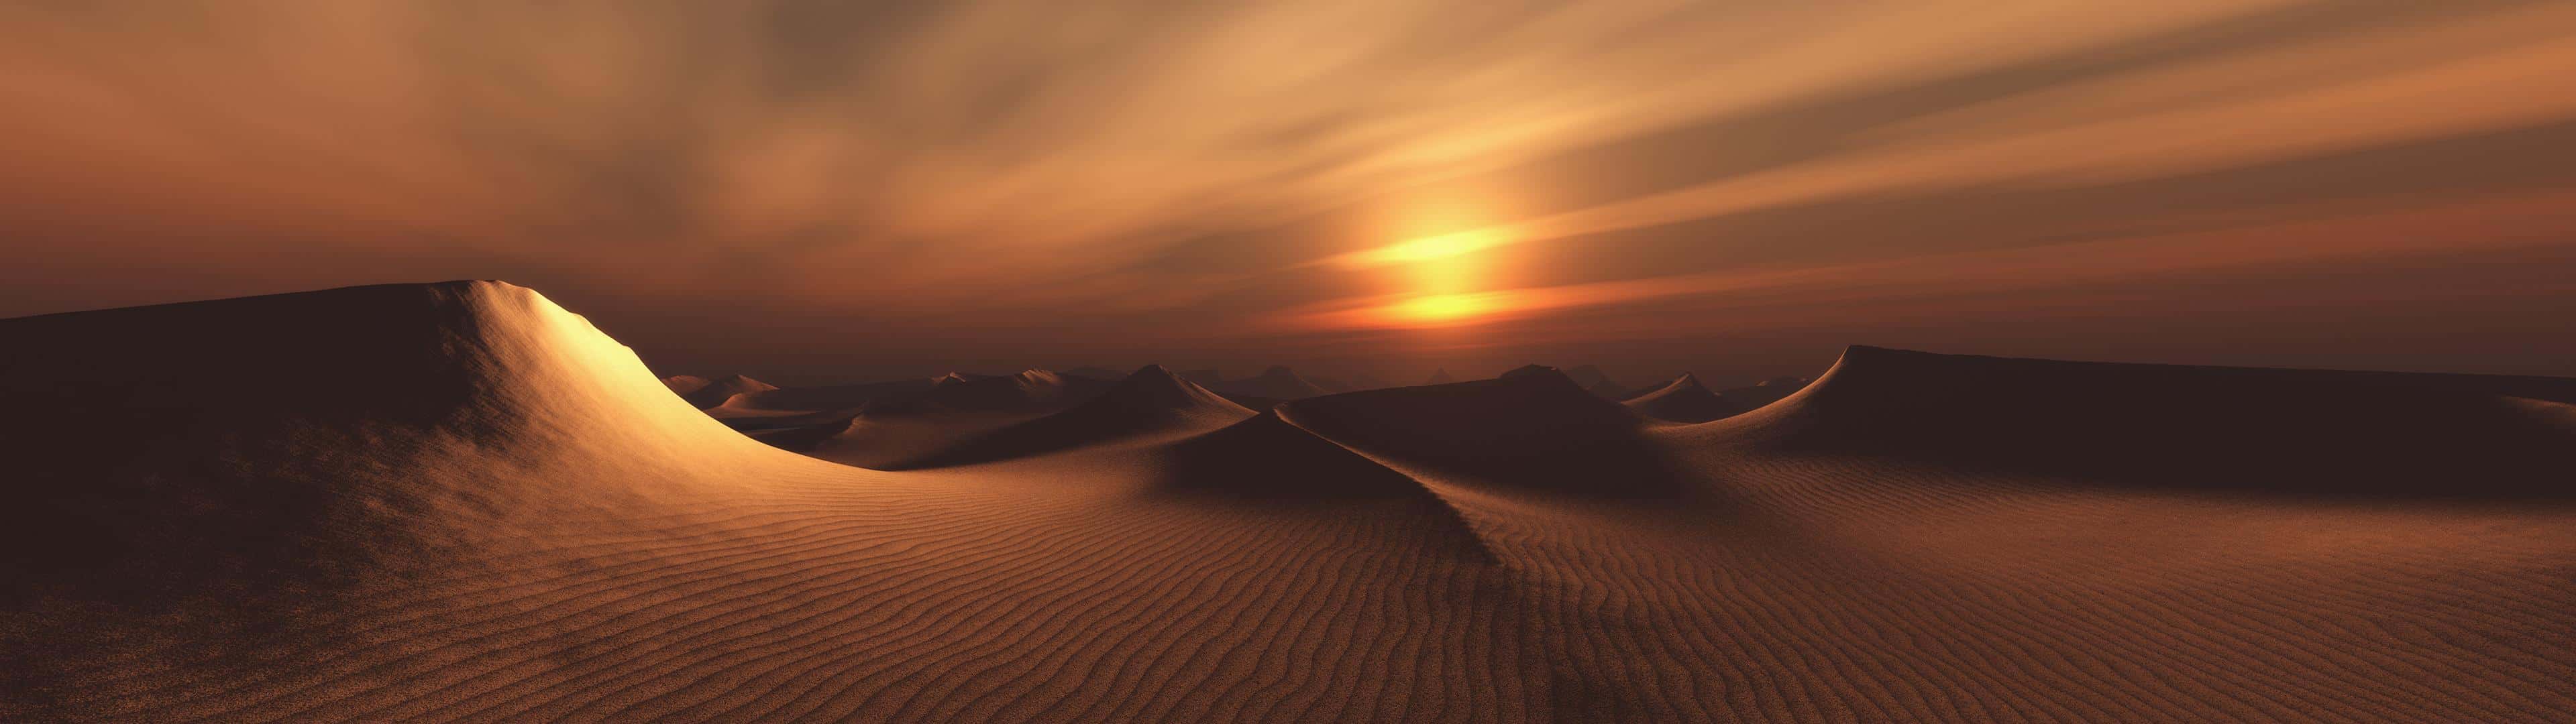 50+ Dune (2021) HD Wallpapers and Backgrounds